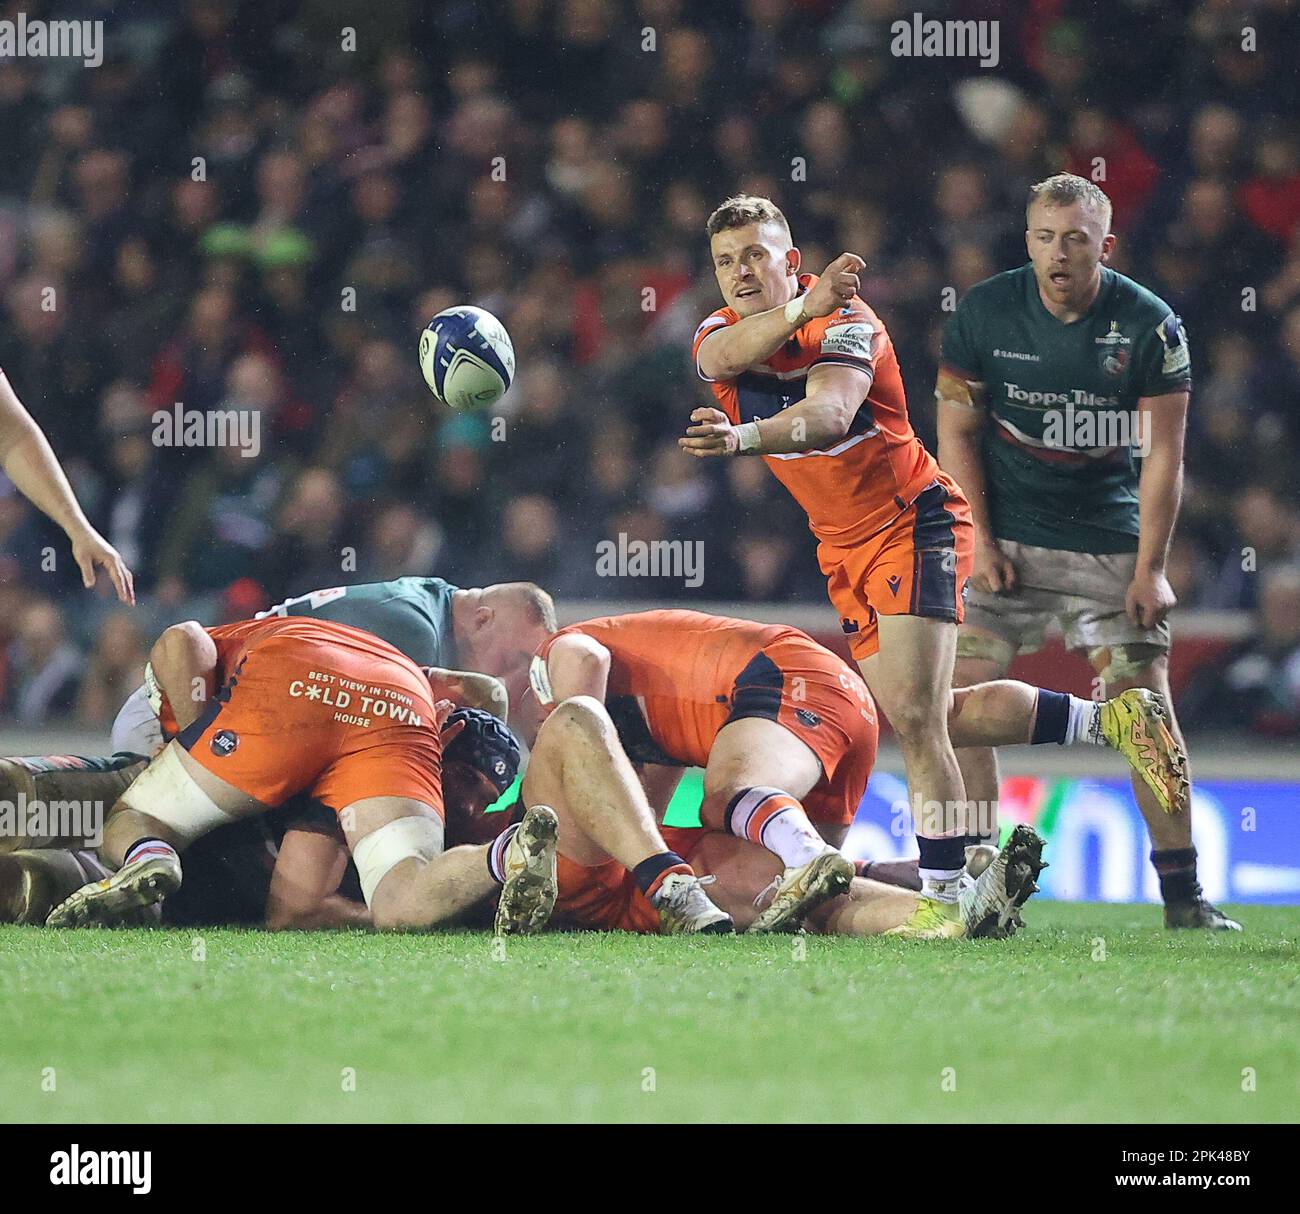 31.03.2022   Leicester, England. Rugby Union.                   Ben Vellacott in action for Edinburgh during the Heineken Champions Cup quarter final match played between Leicester Tigers and Edinburgh Rugby at the Mattioli Woods Welford Road Stadium, Leicester.  © Phil Hutchinson Stock Photo